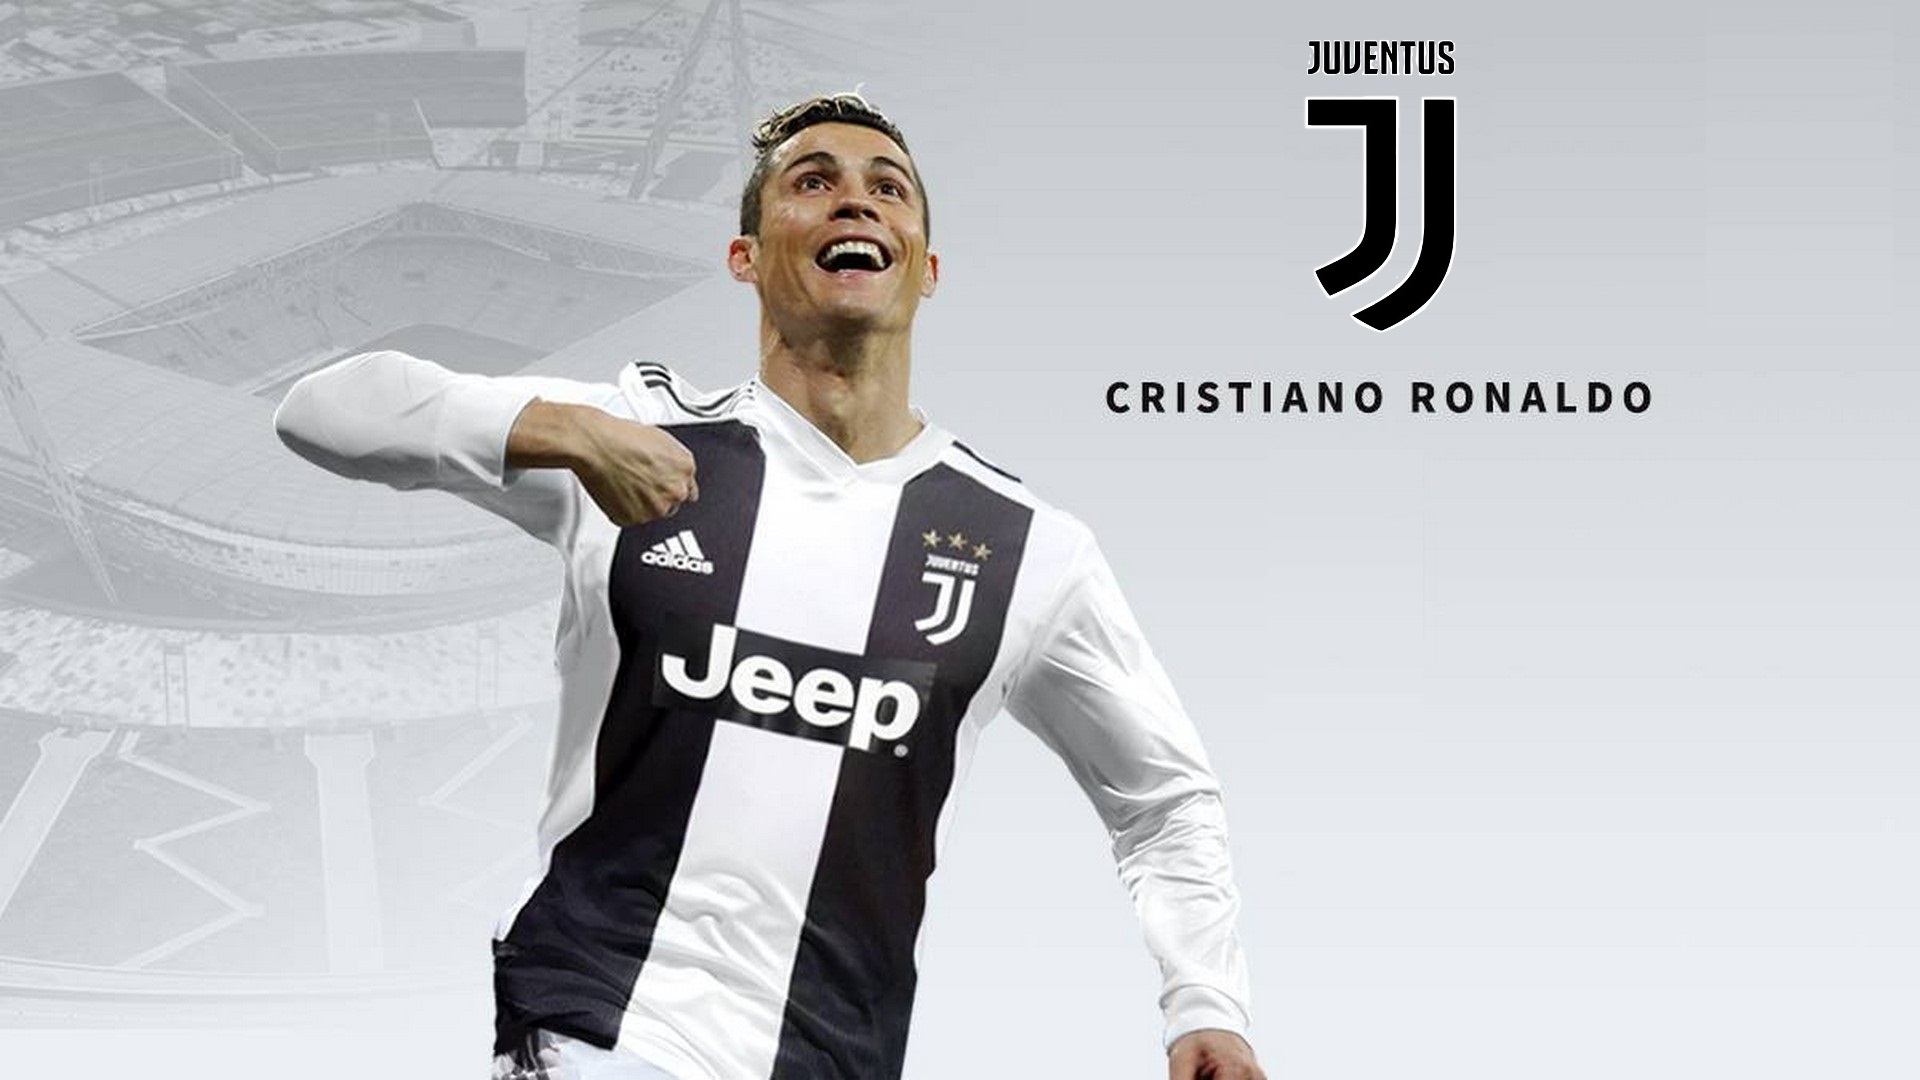 Cristiano Ronaldo Juventus Wallpaper HD With Resolution 1920X1080 pixel. You can make this wallpaper for your Mac or Windows Desktop Background, iPhone, Android or Tablet and another Smartphone device for free